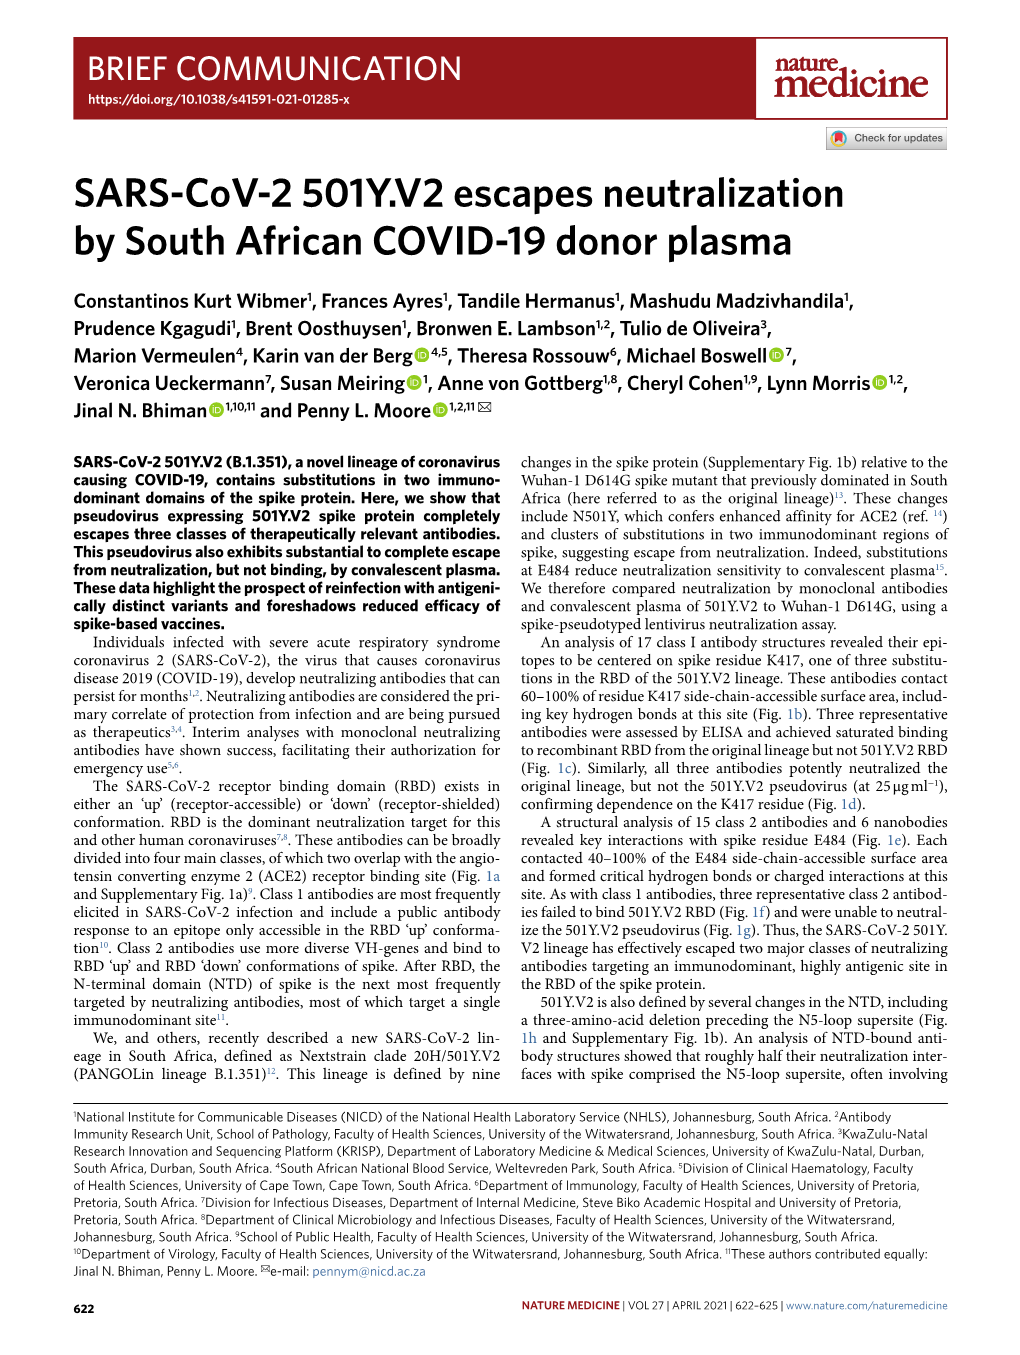 SARS-Cov-2 501Y.V2 Escapes Neutralization by South African COVID-19 Donor Plasma